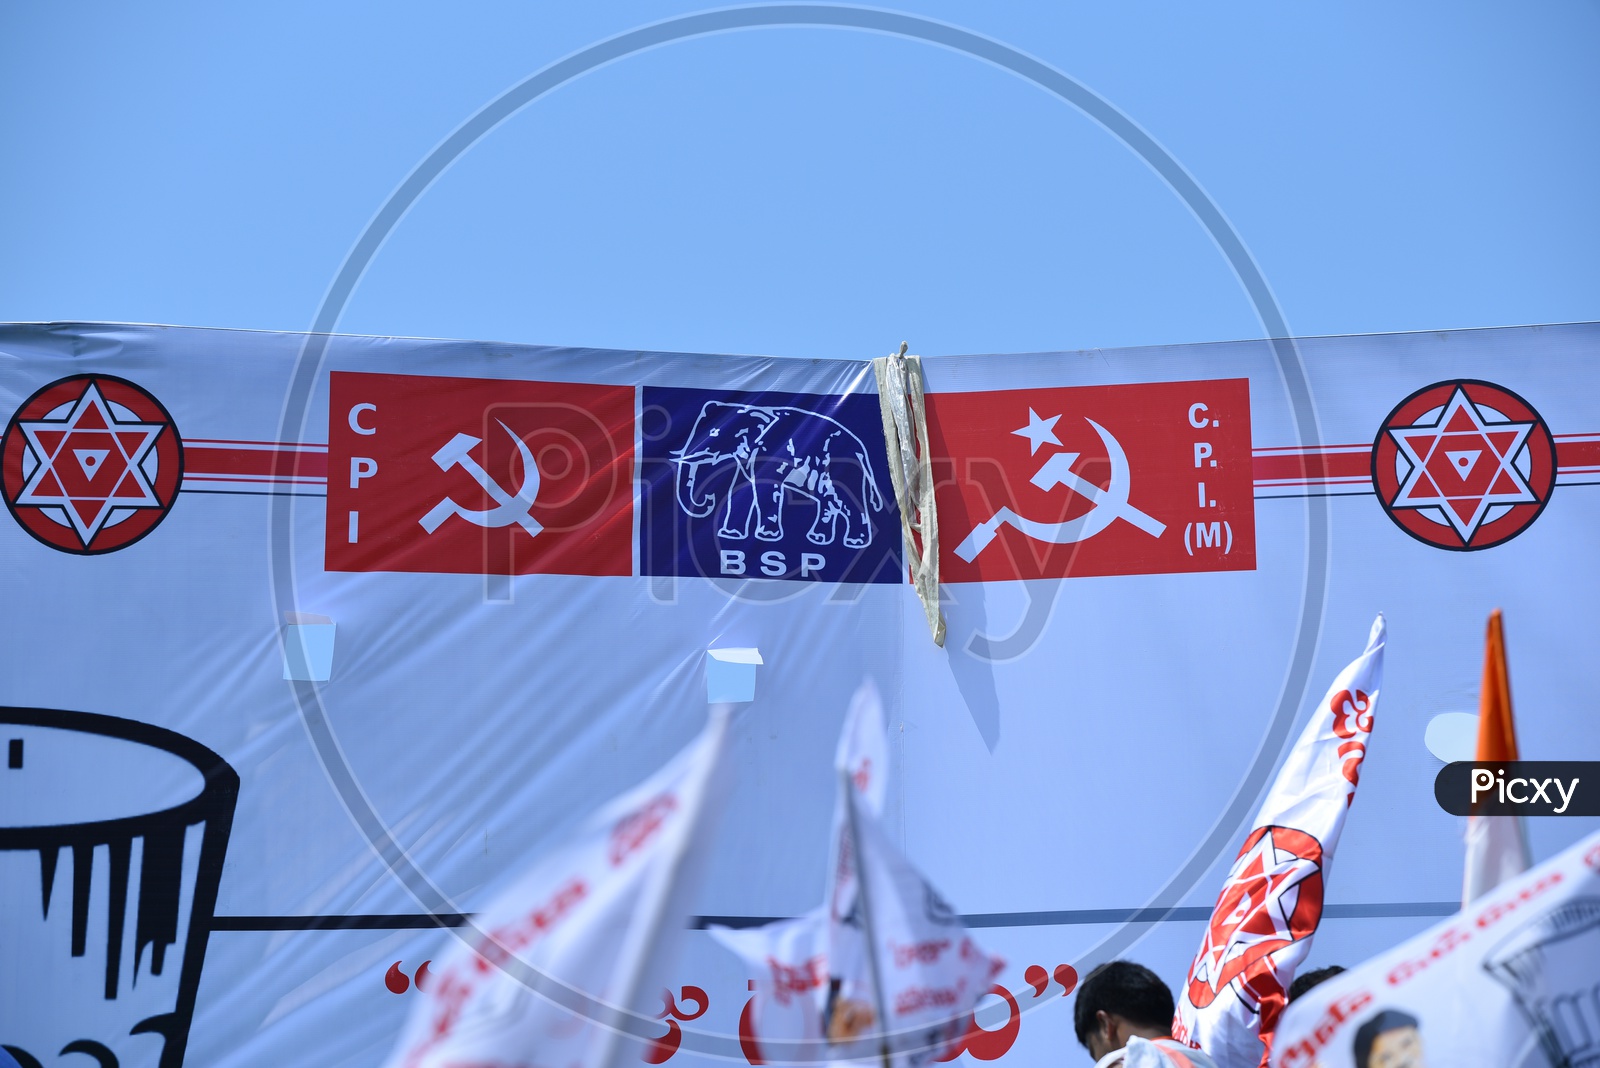 Jana sena party symbol, CPI, C.P.I (M) and BSP party flags on a banner at an election campaign